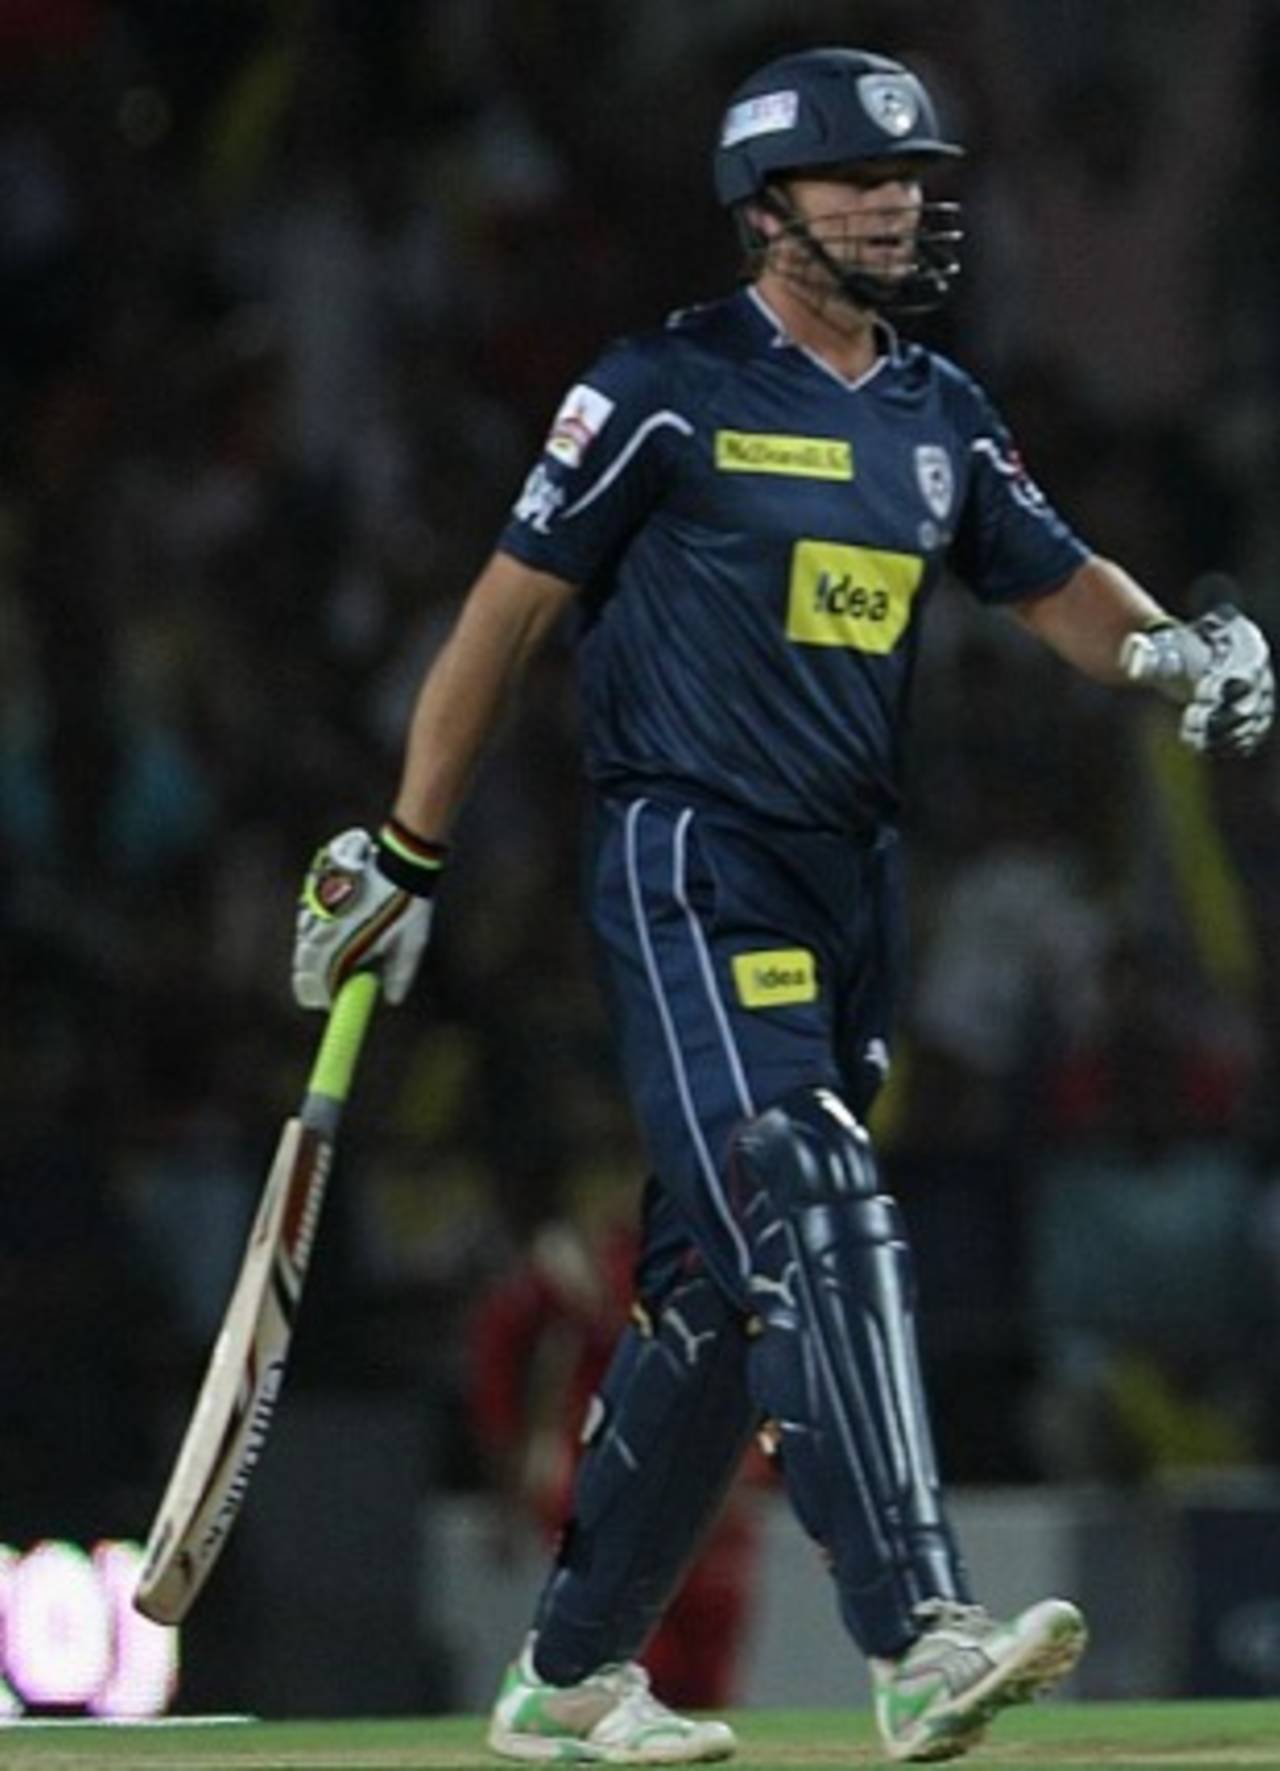 With Adam Gilchrist due a big innings, and the young Indian batsmen in good form, Deccan Chargers are looking dangerous&nbsp;&nbsp;&bull;&nbsp;&nbsp;Indian Premier League